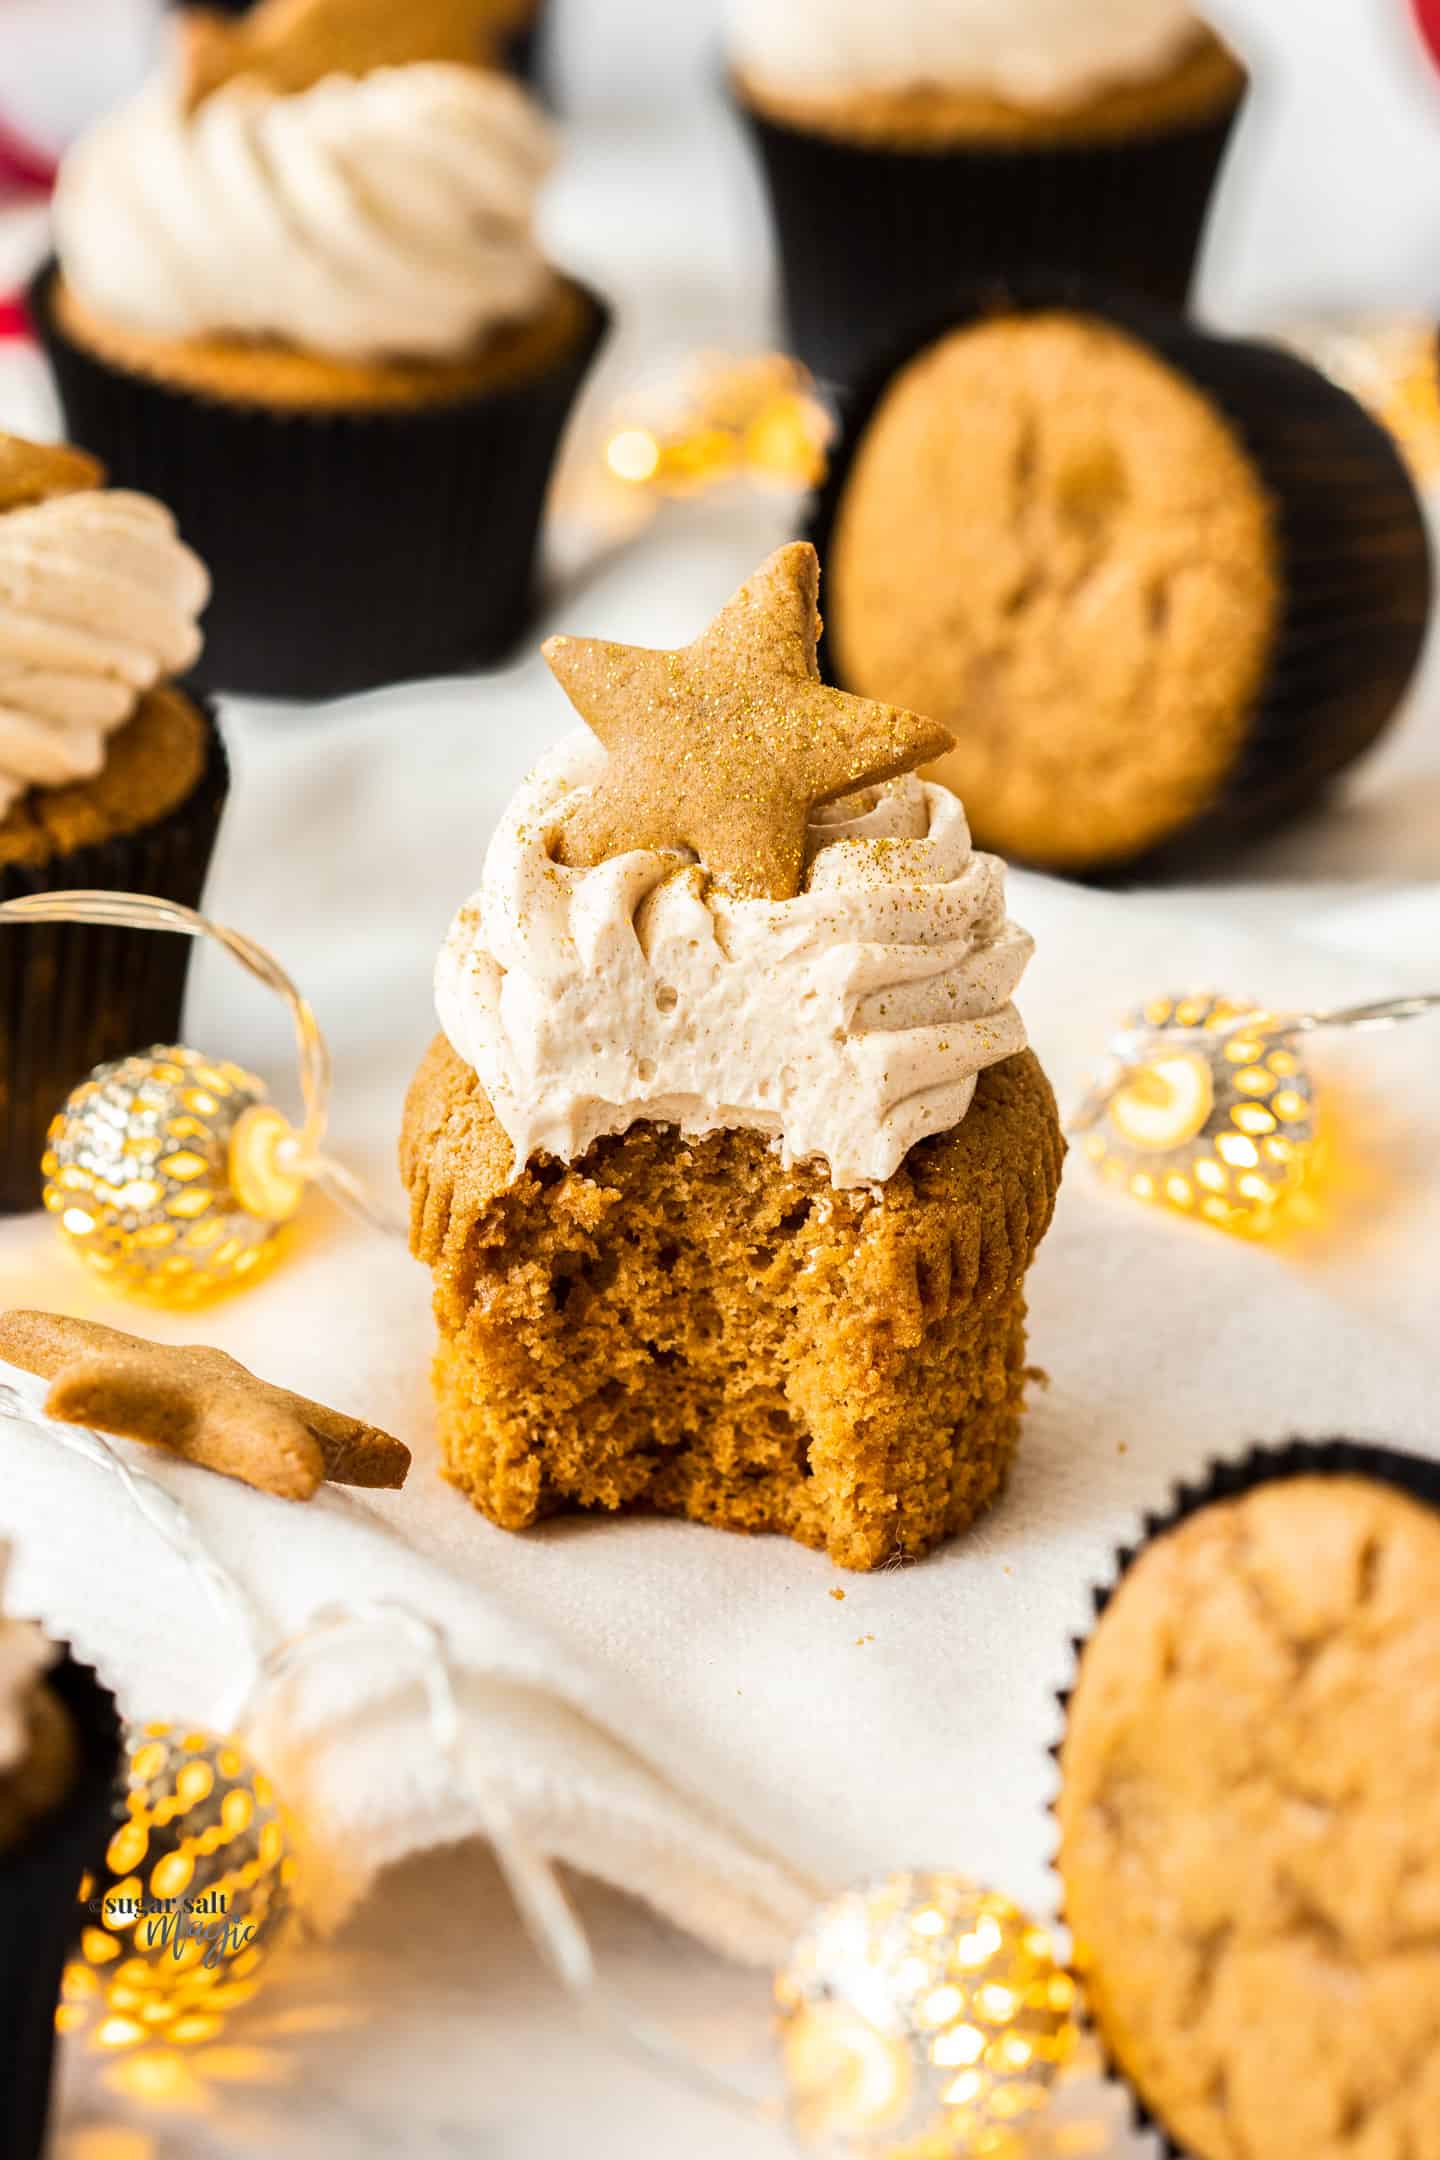 A gingerbread cupcake with a bite taken out showing the inside.